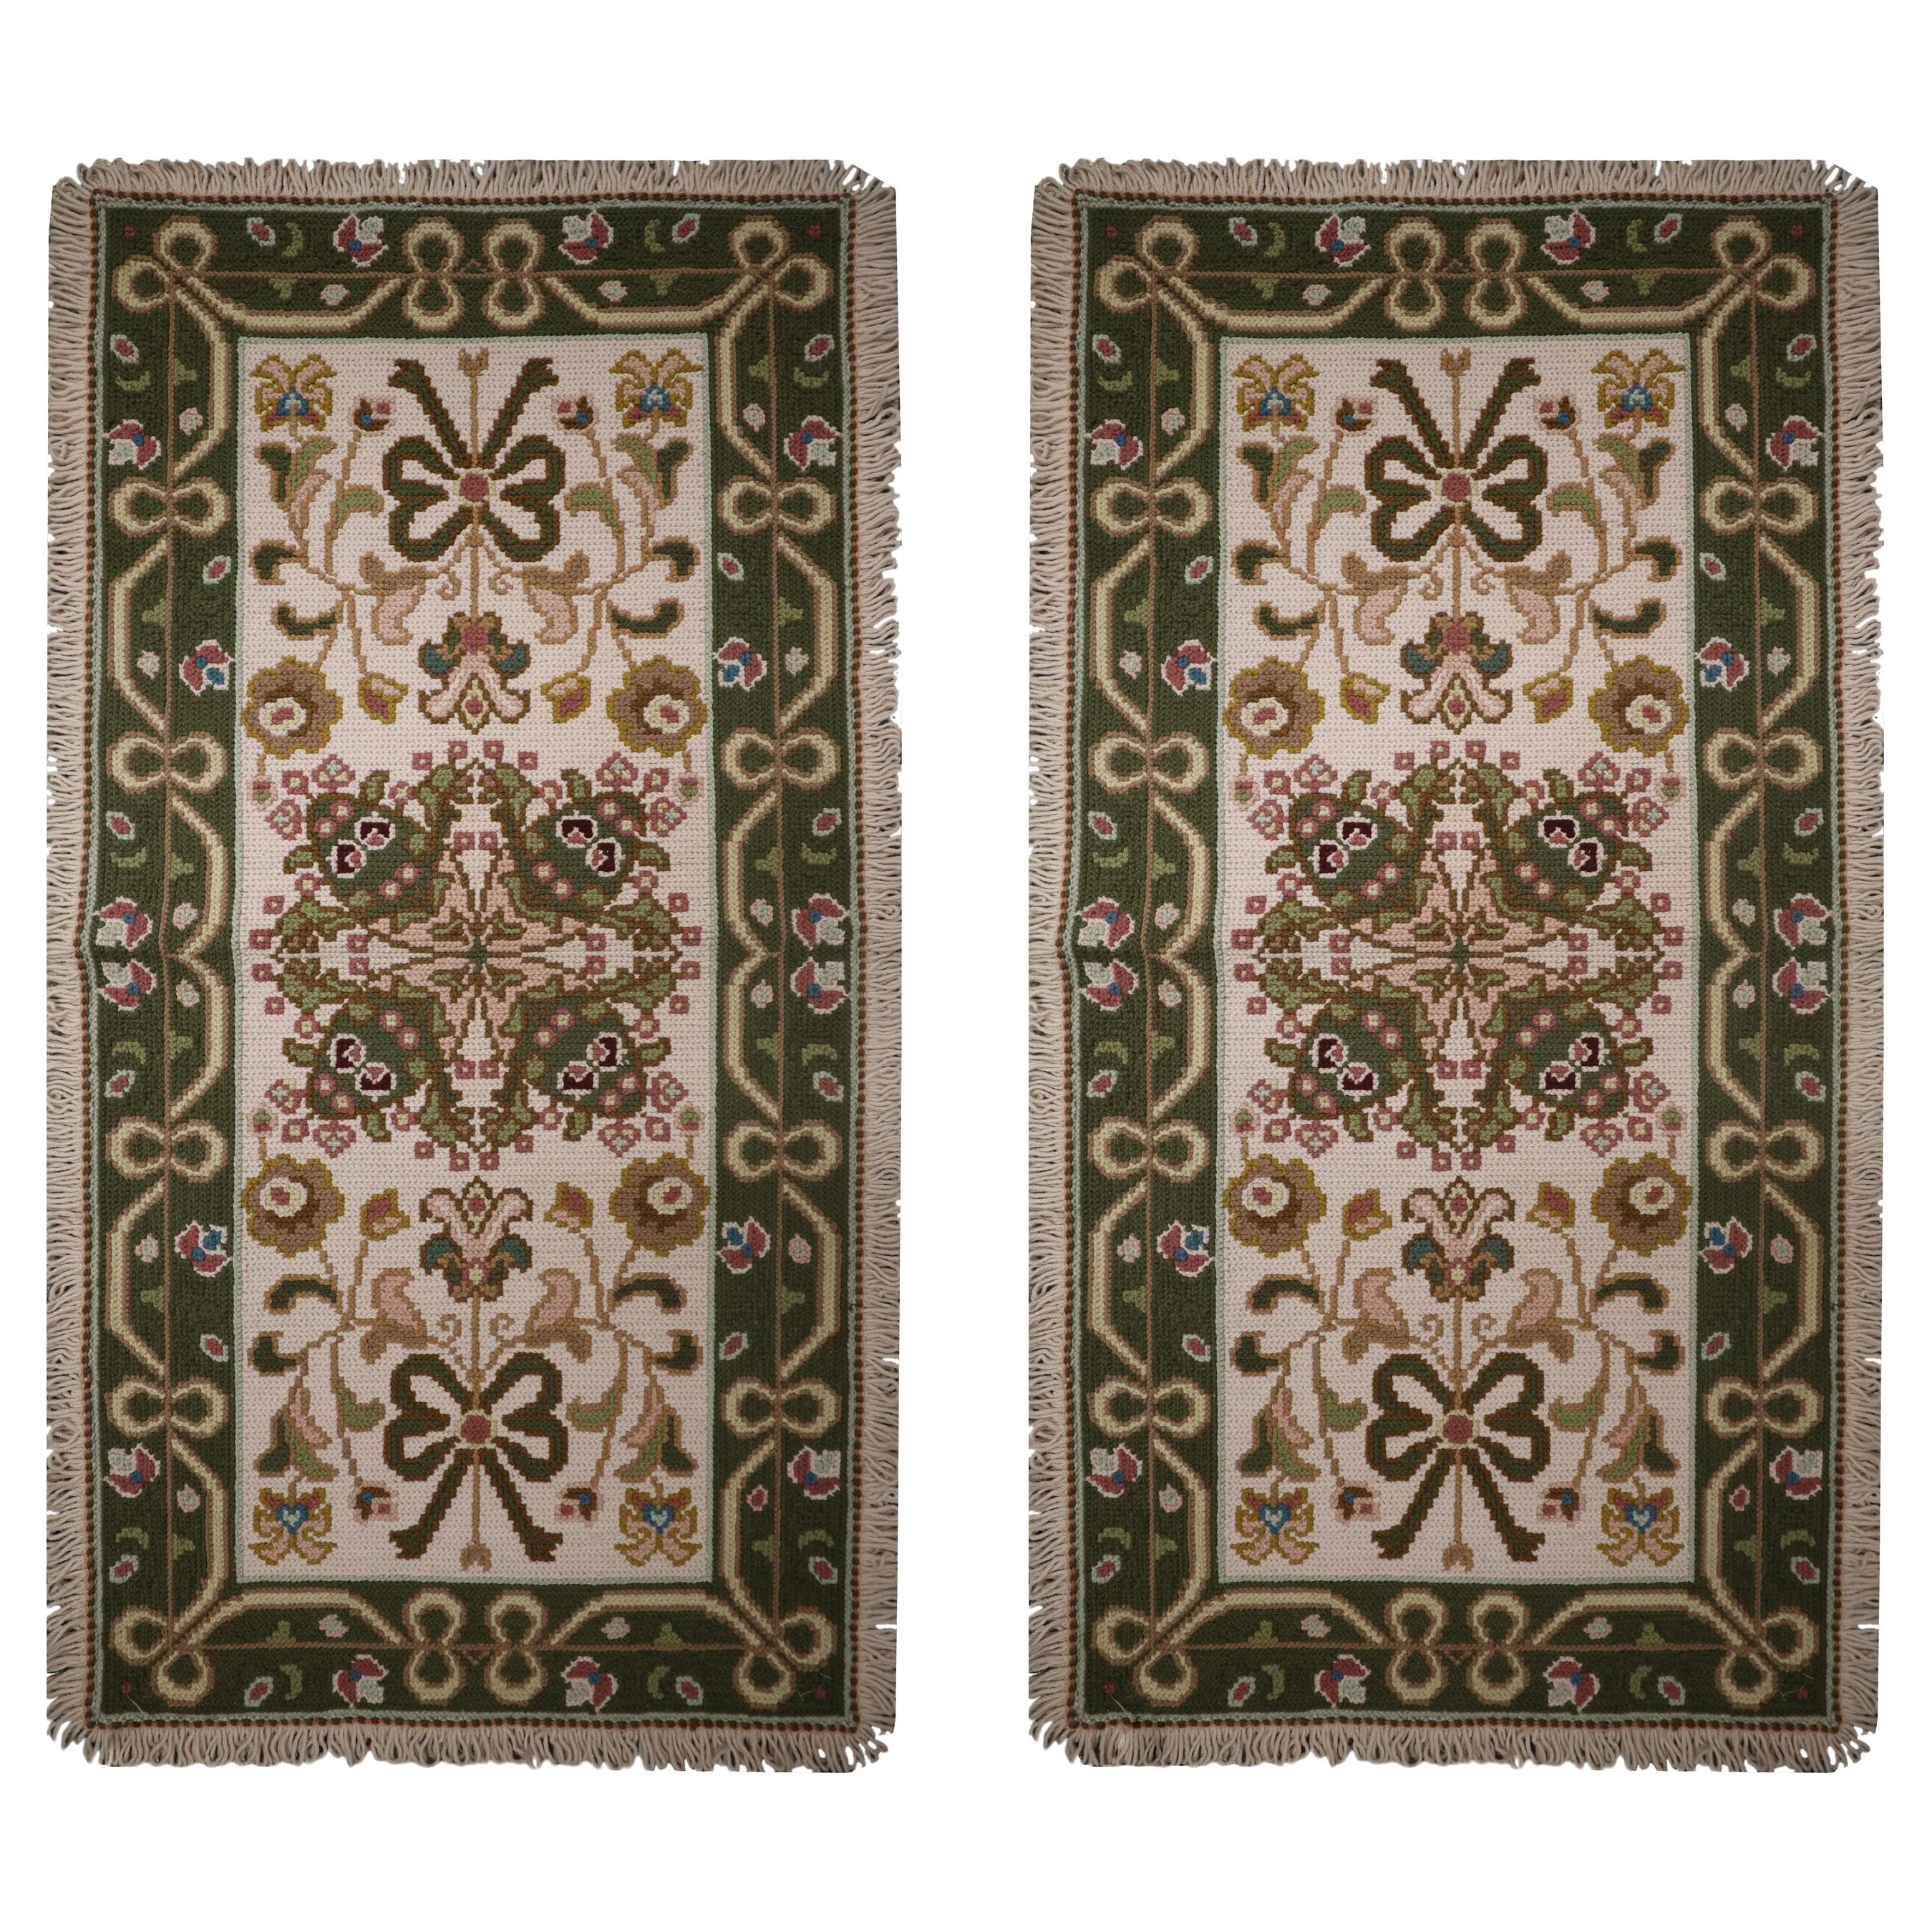 Pair of Handwoven Carpet Portuguese Needlepoint Rugs Wool Floral Rugs 65x135cm